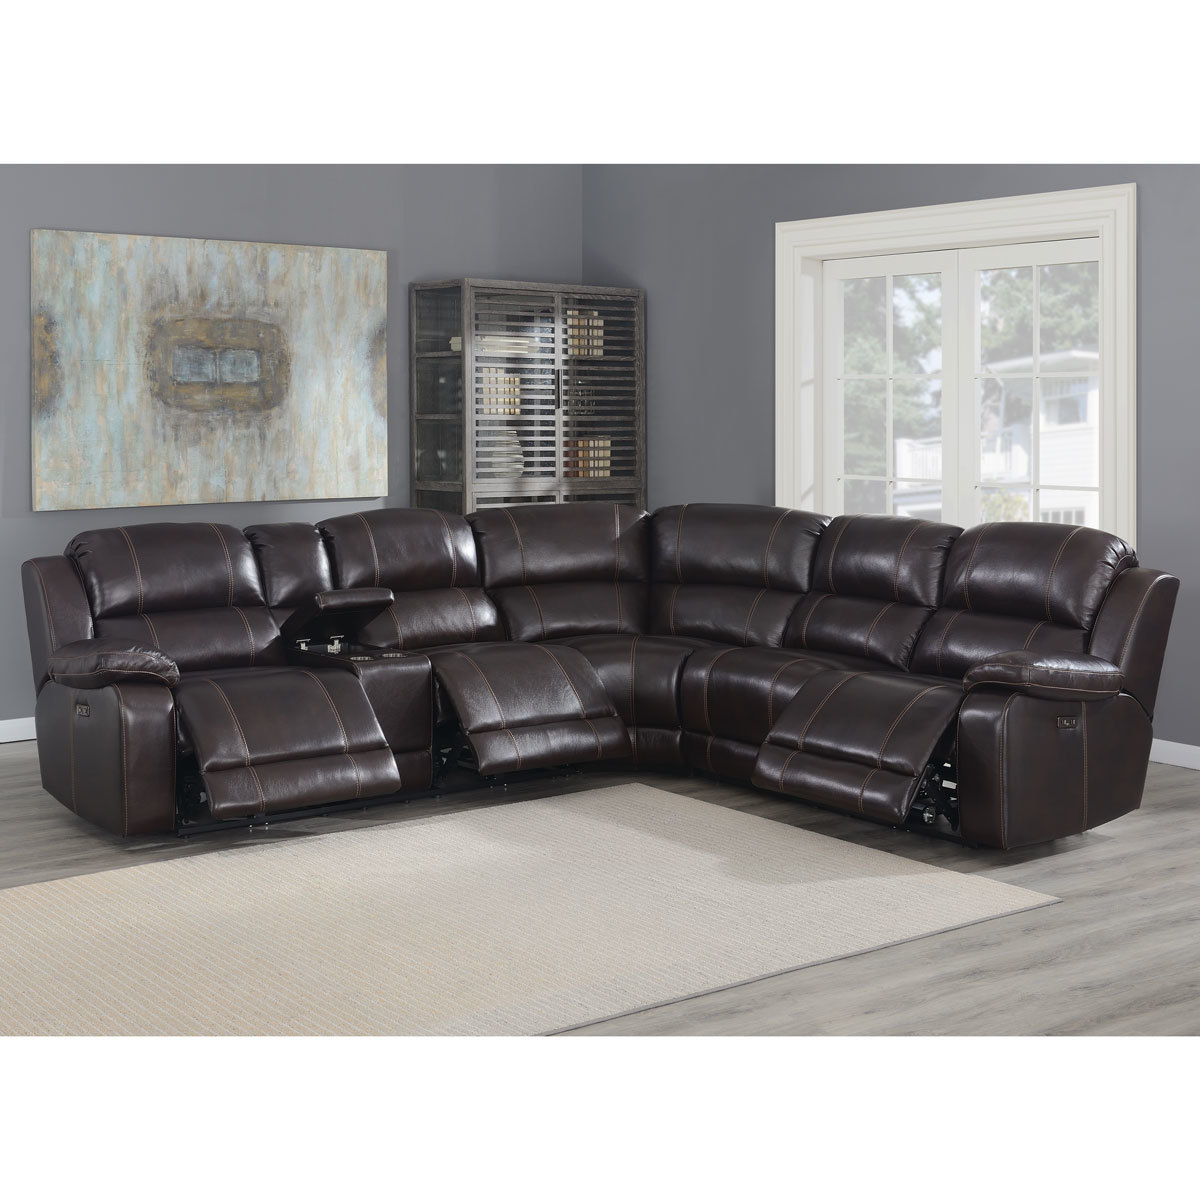 Pulaski Dunhill Brown Leather Power, Dark Brown Leather Recliner Sectional